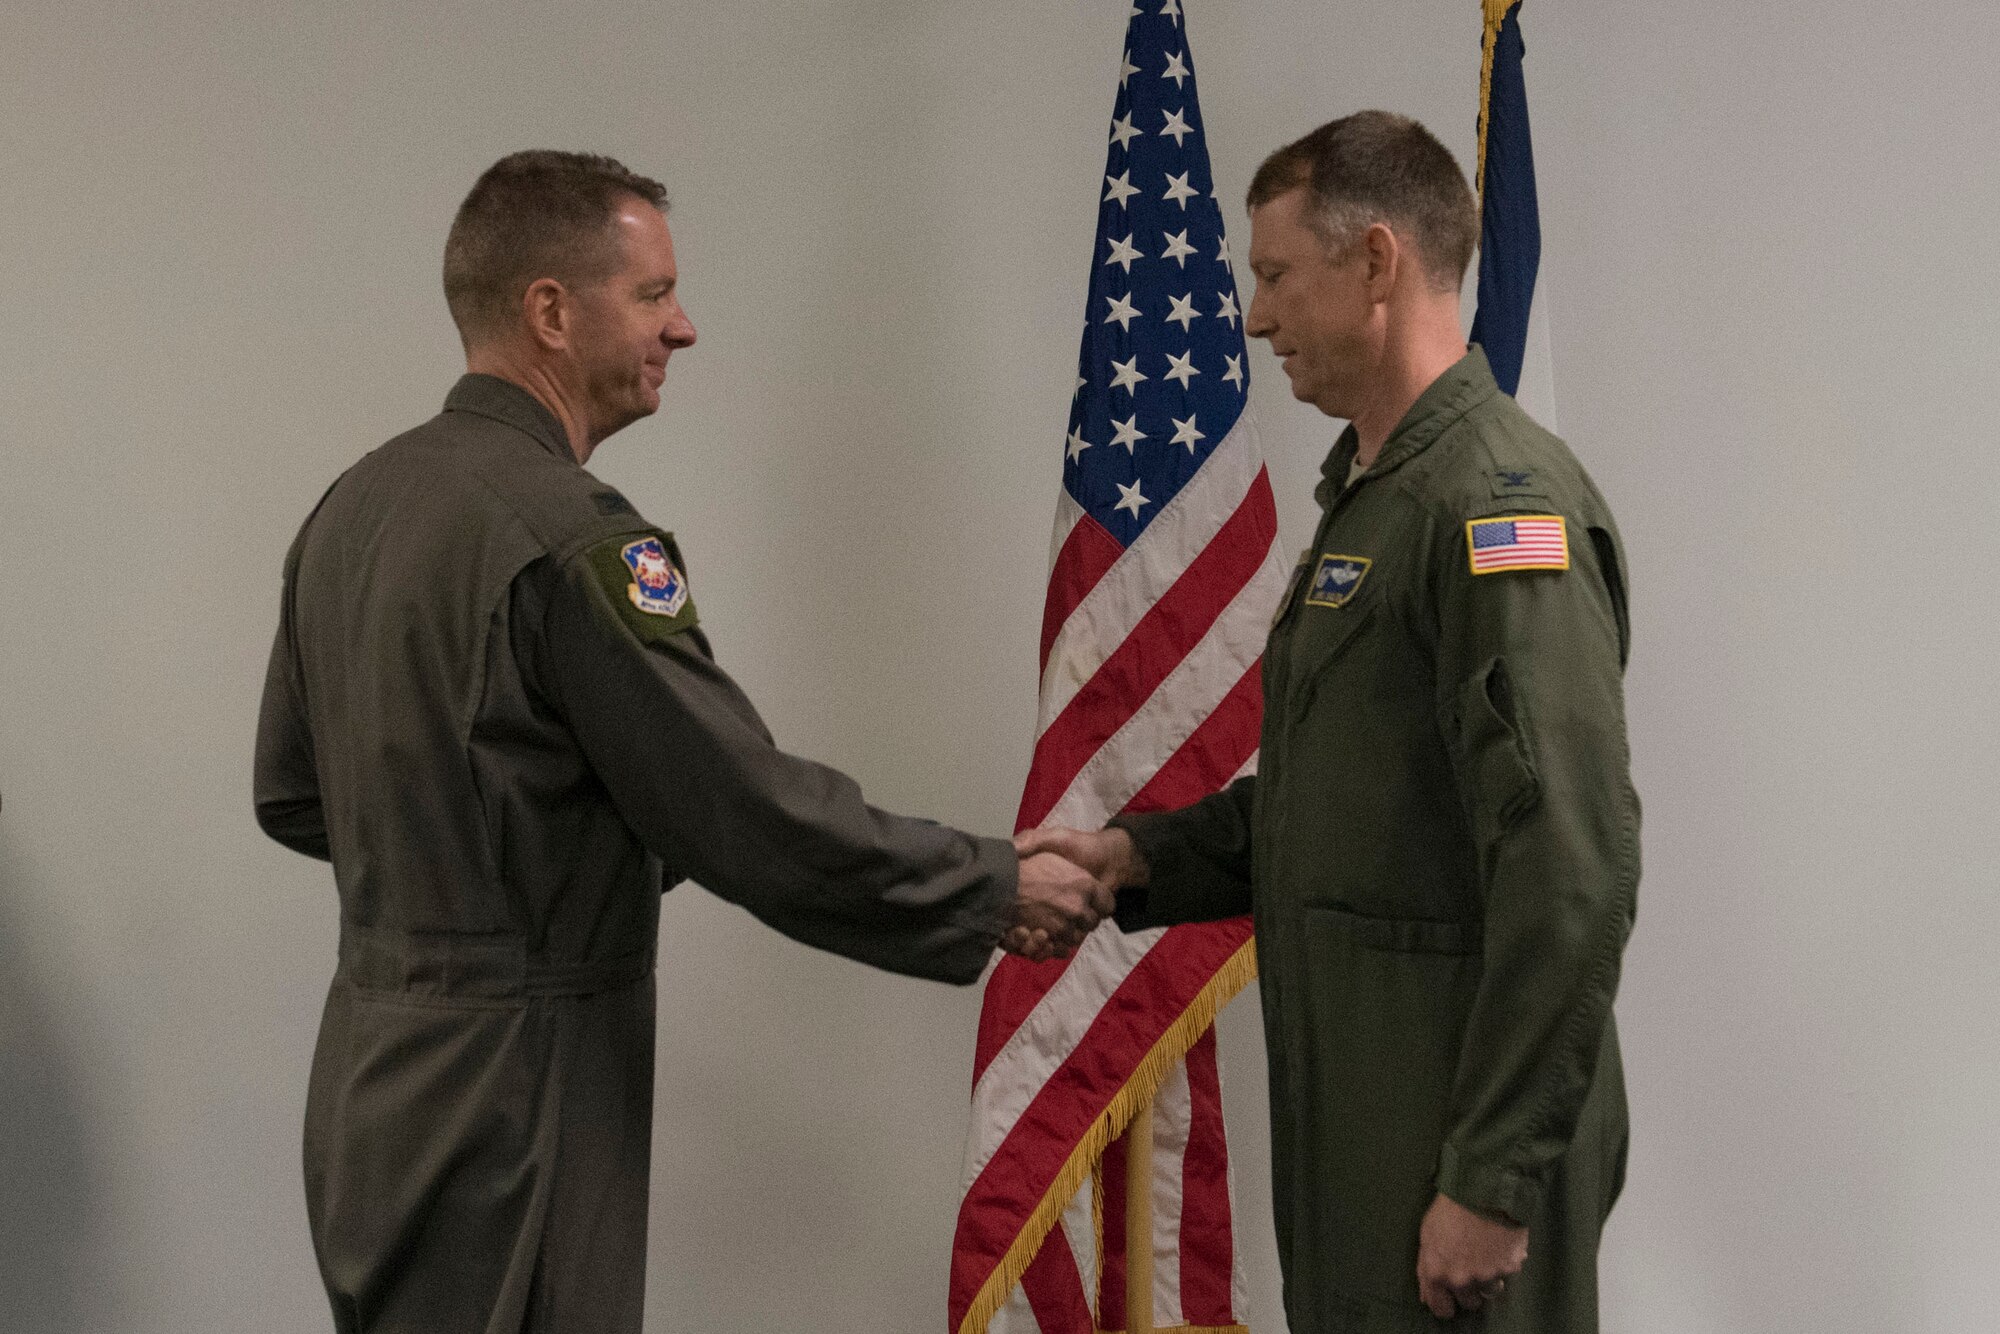 Col. Marty Timko, 167th Airlift Wing commander, congratulates Col. Christopher Sigler upon his assumption of command of the 167th Operations Group during a ceremony at the 167th Airlift Wing, Feb. 2, 2020.